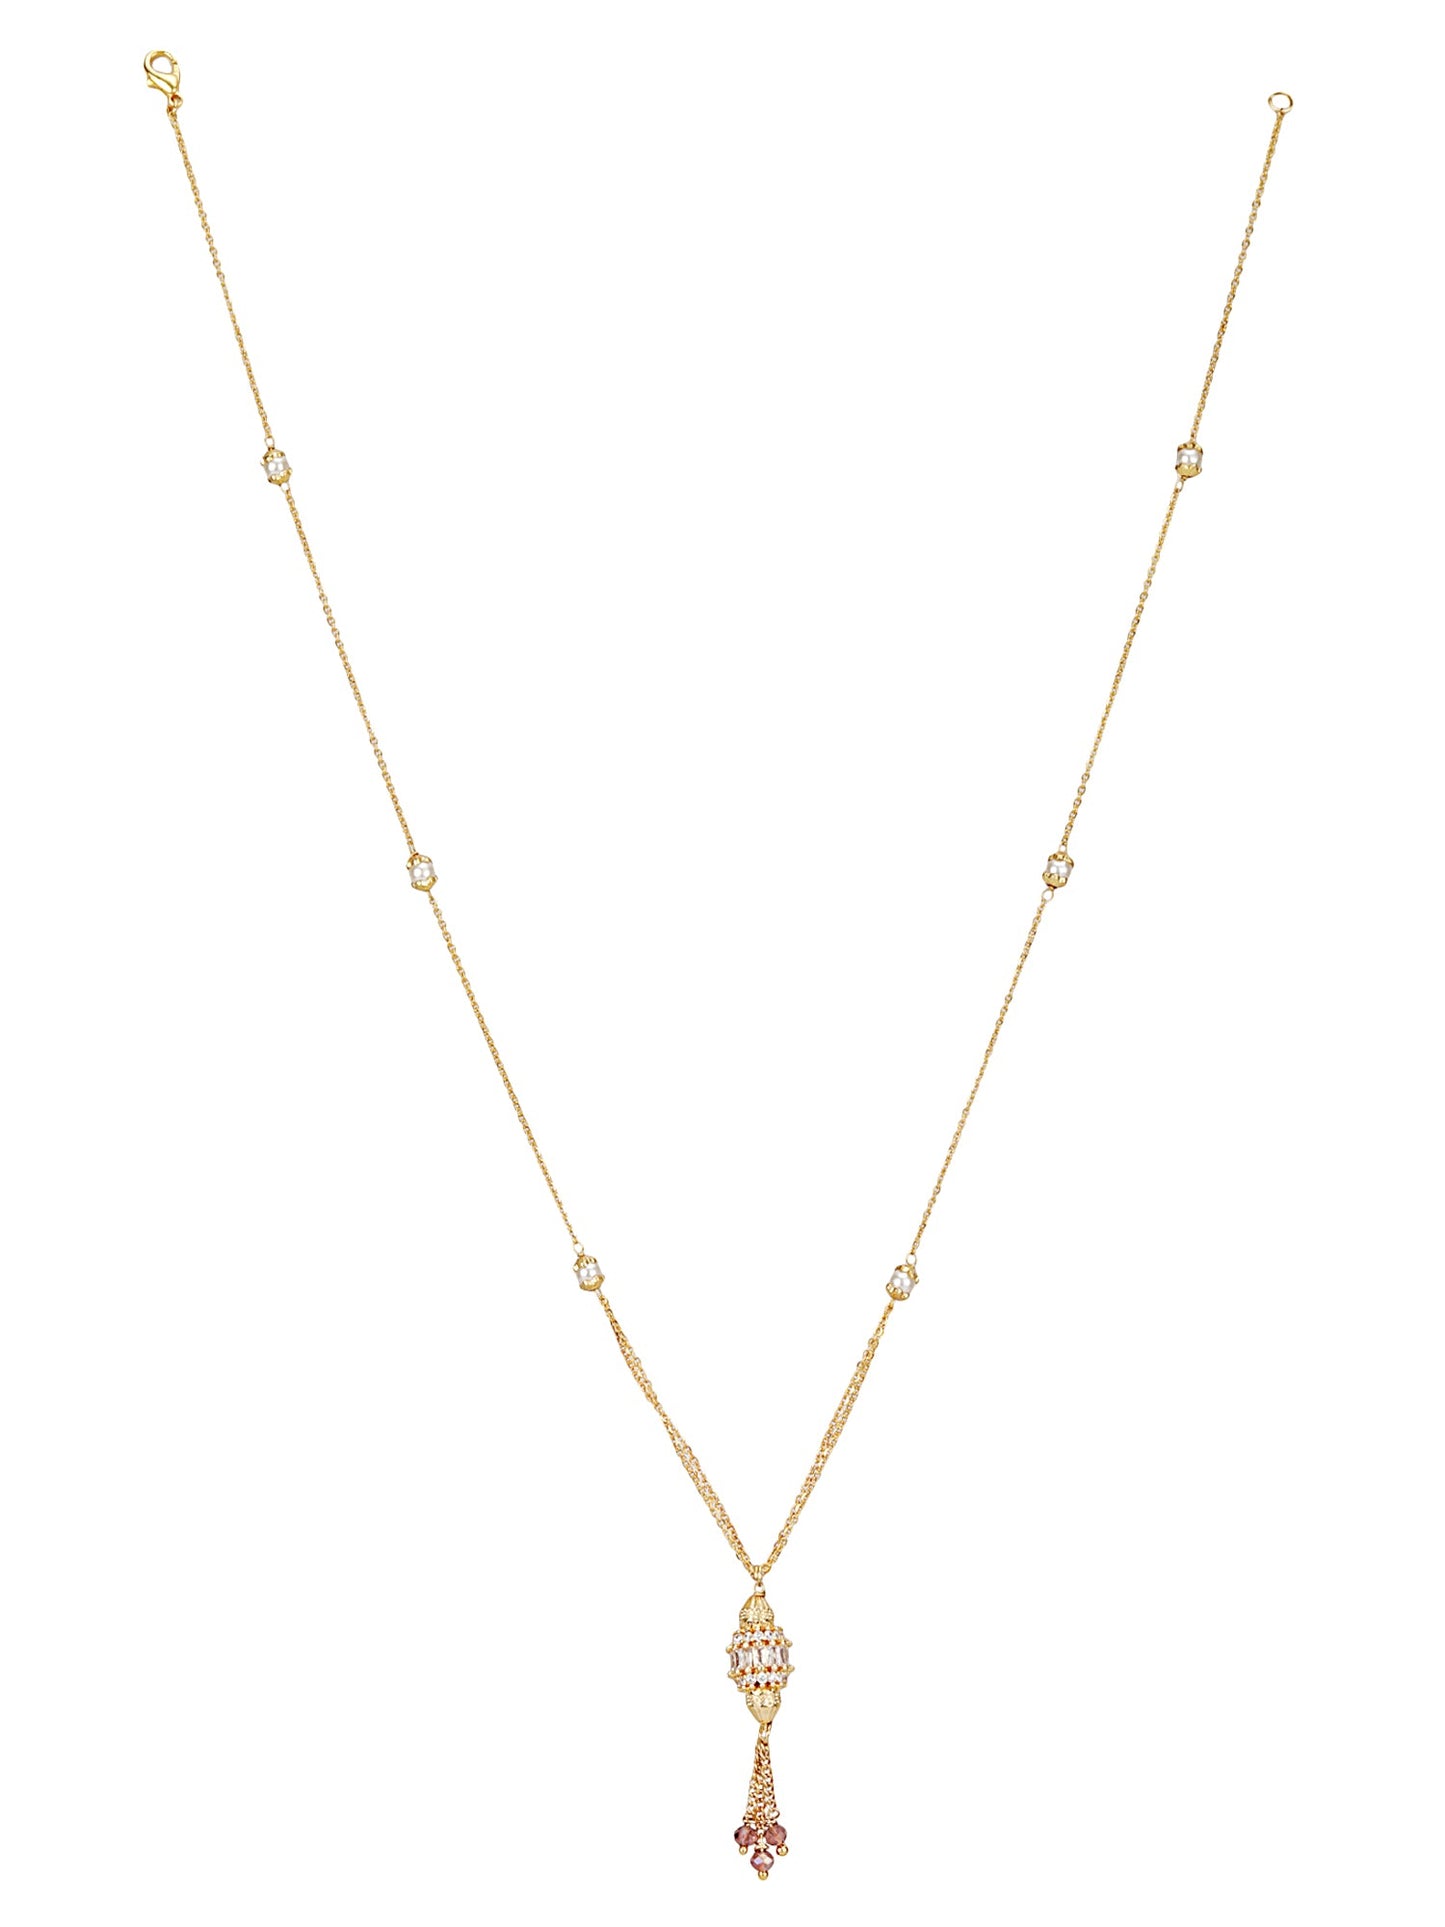 Mekkna Women’s Pride Alloy Traditional Stylish & Gold-Plated Mangalsutra set for Women